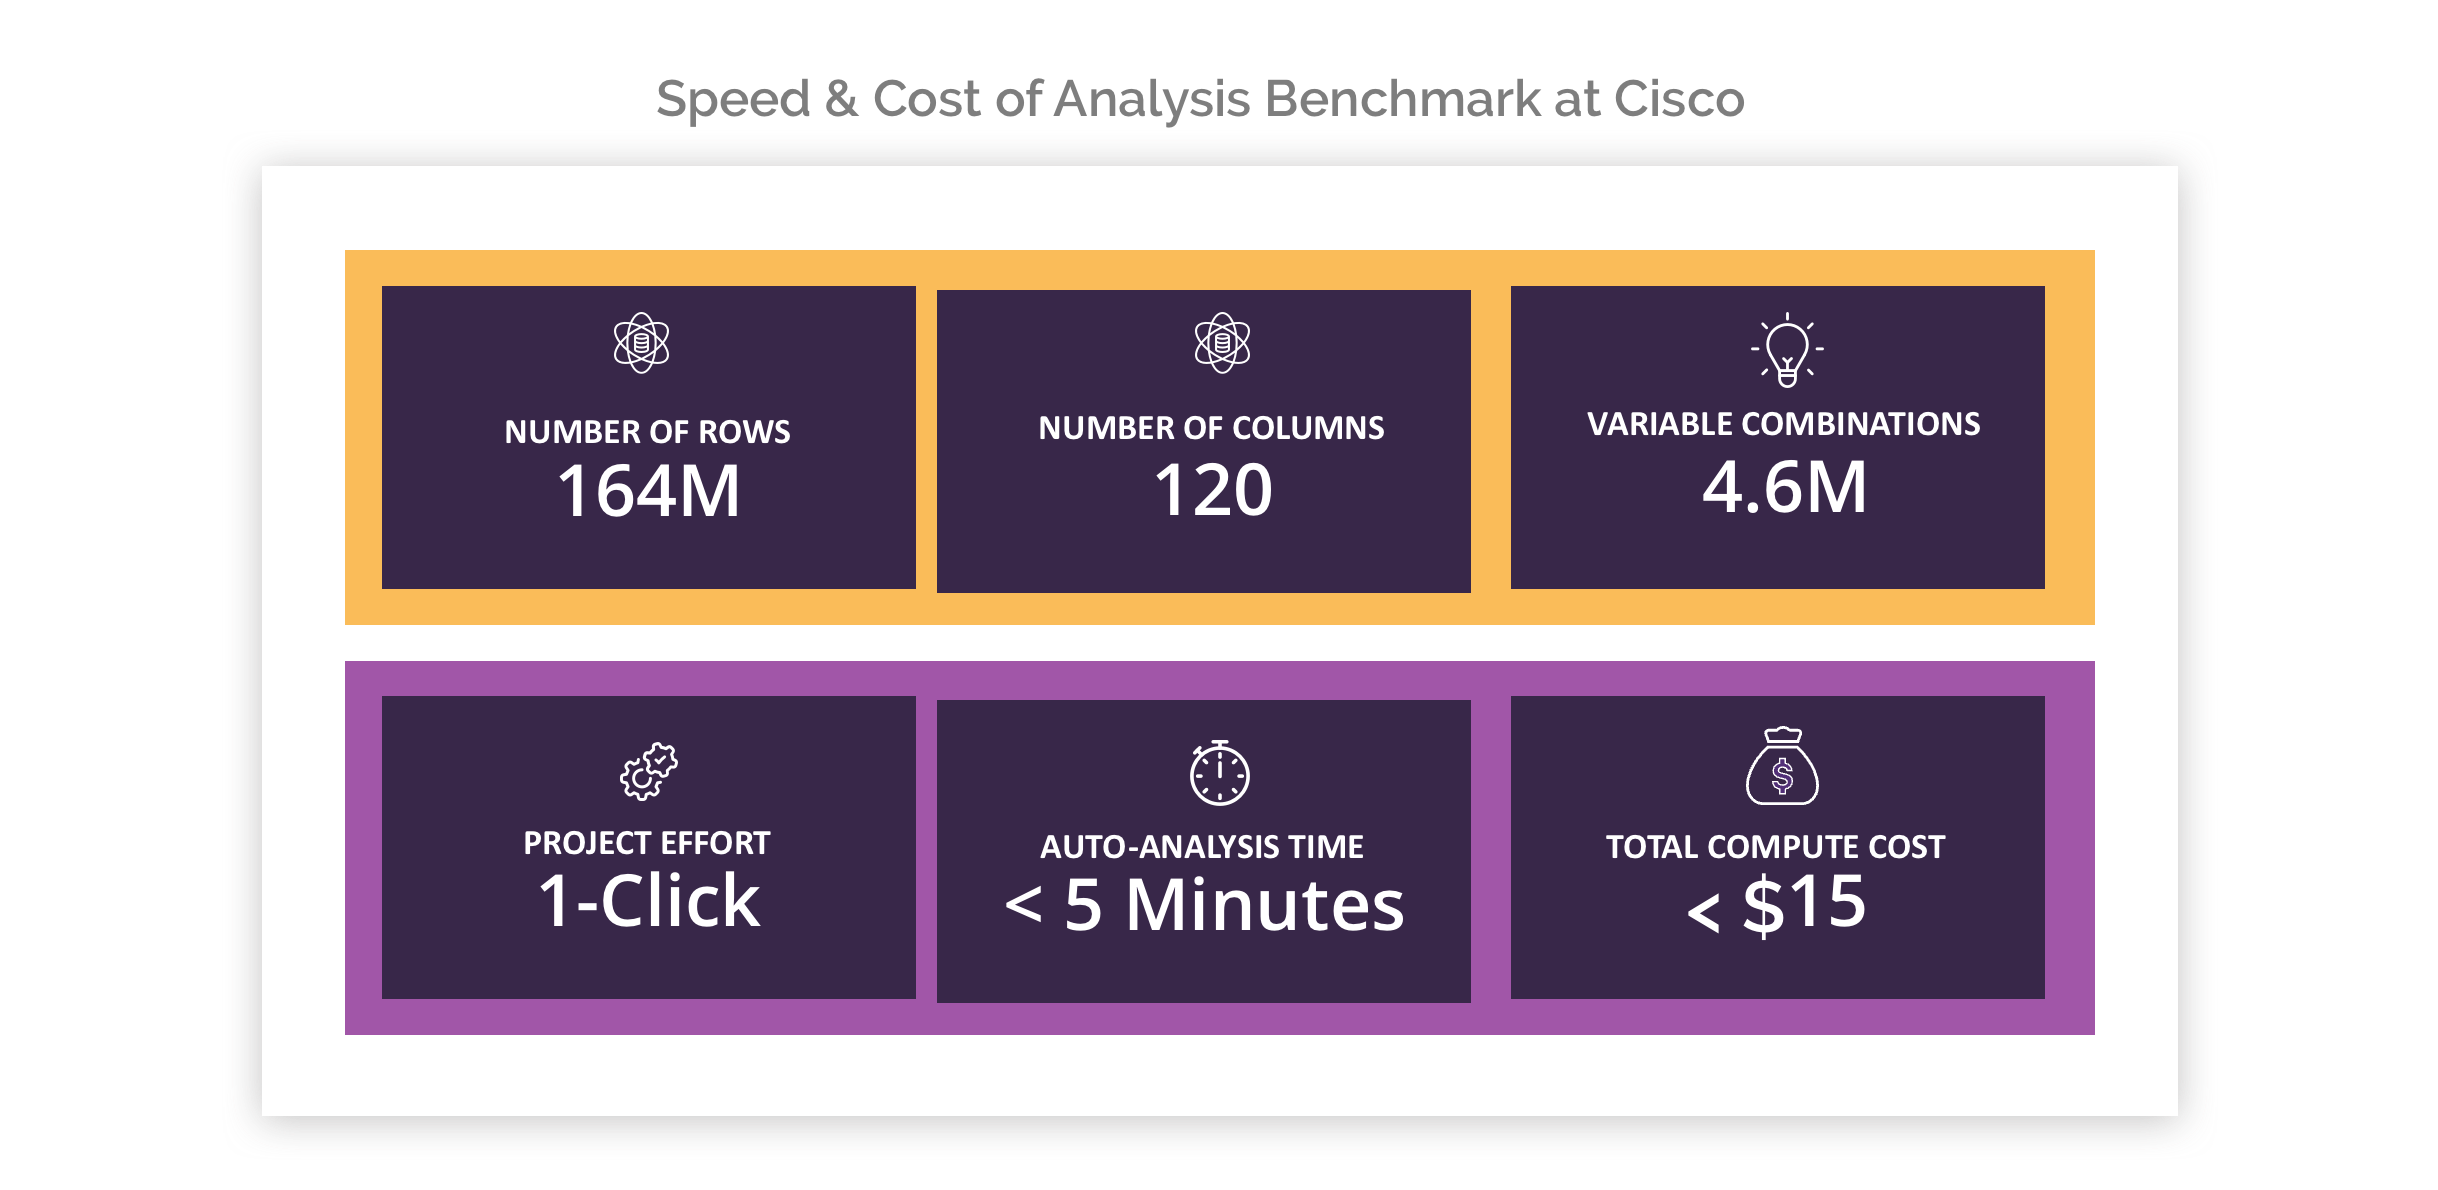 Speed & Cost of Analysis Benchmark at Cisco